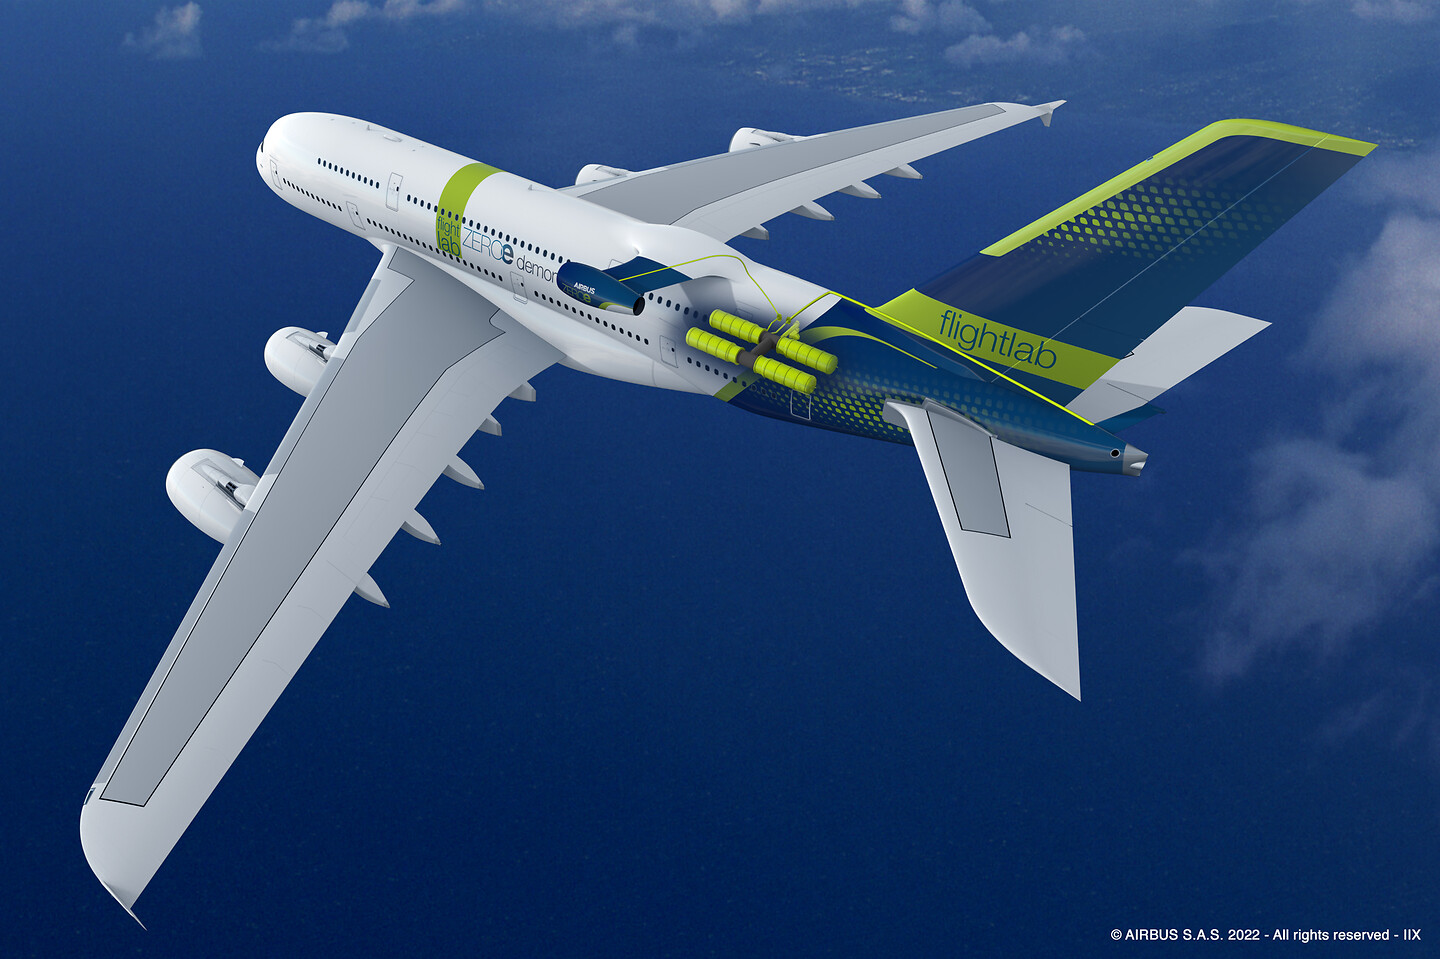 Airbus to Use A380 Superjumbo as Hydrogen-Powered Test Bed